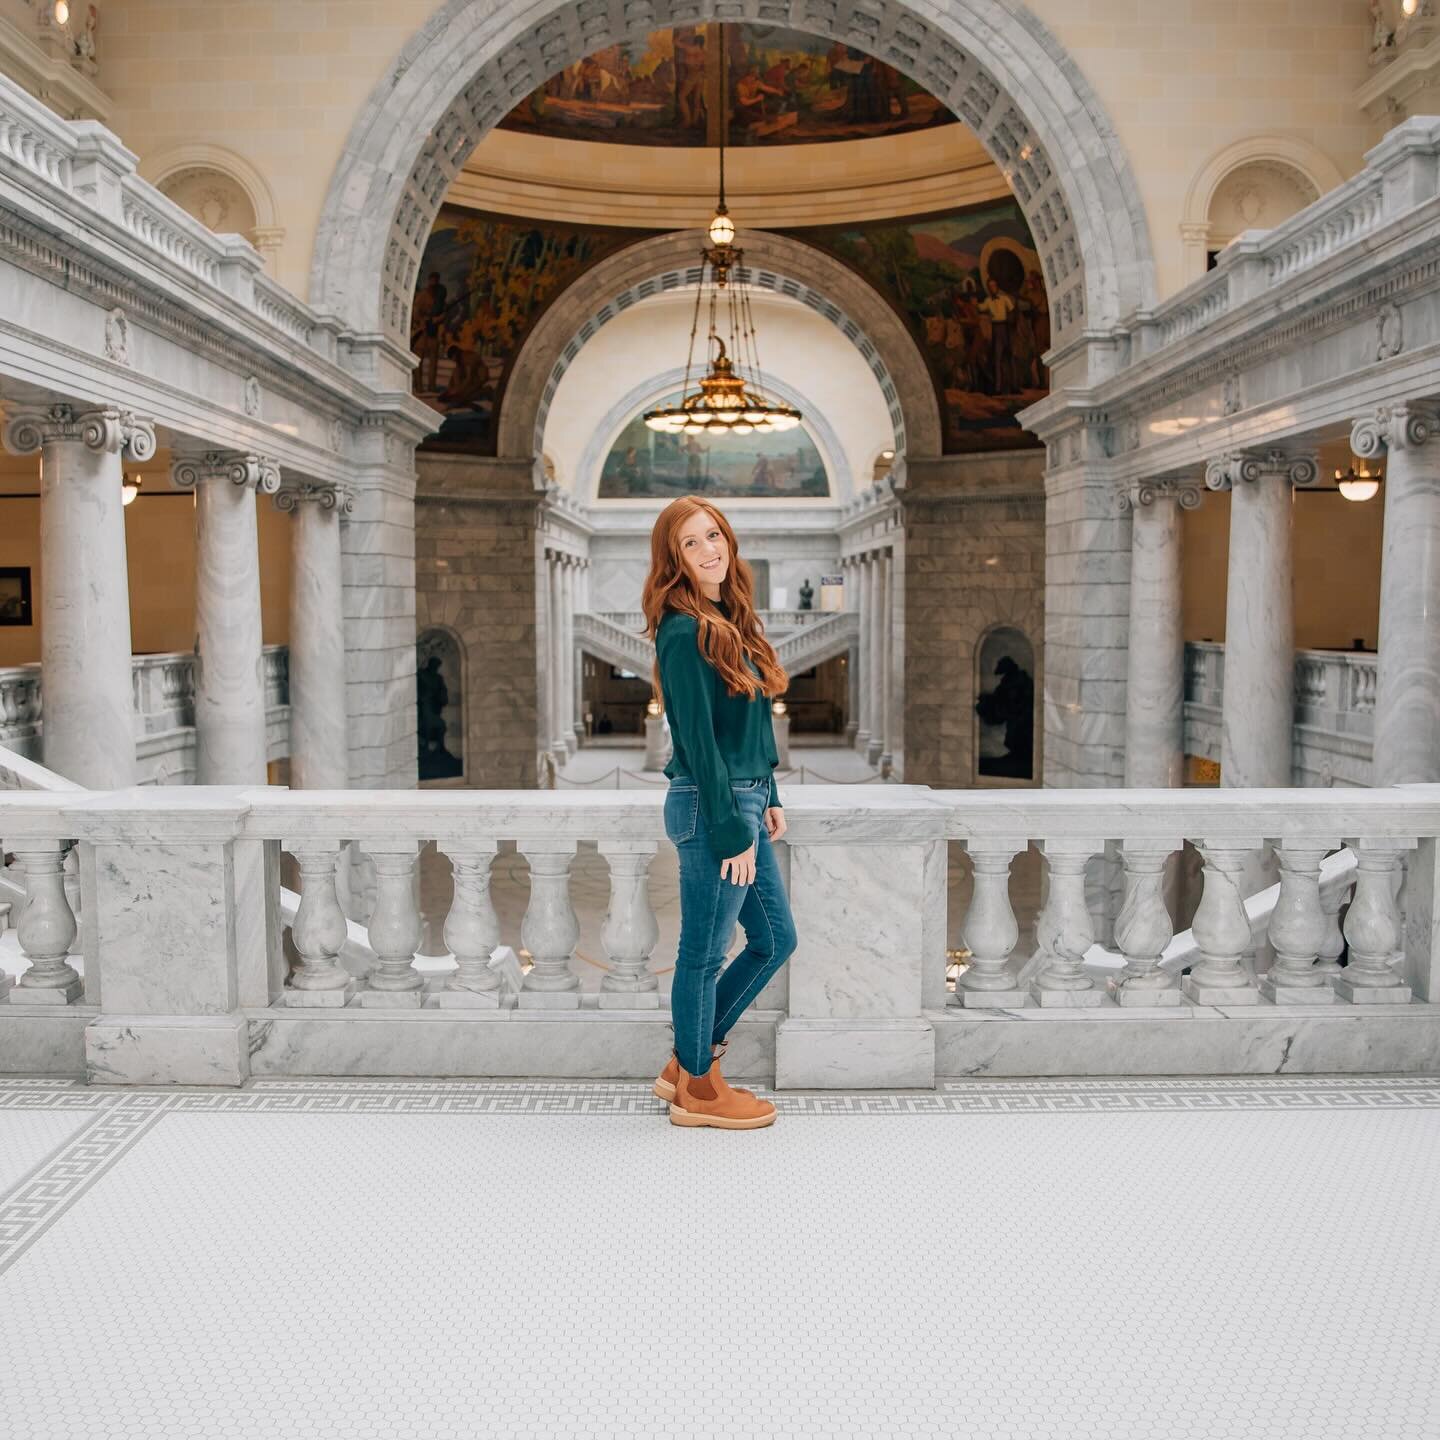 Our Christmas break is almost over, the kids go back to school this Wednesday! The days are long but the weeks, months and years are short! 🙃 PS how STUNNING is my soul sista in the #slccapitol building?! 
.
.
.
.
.

#durangocoloradophotographer #du